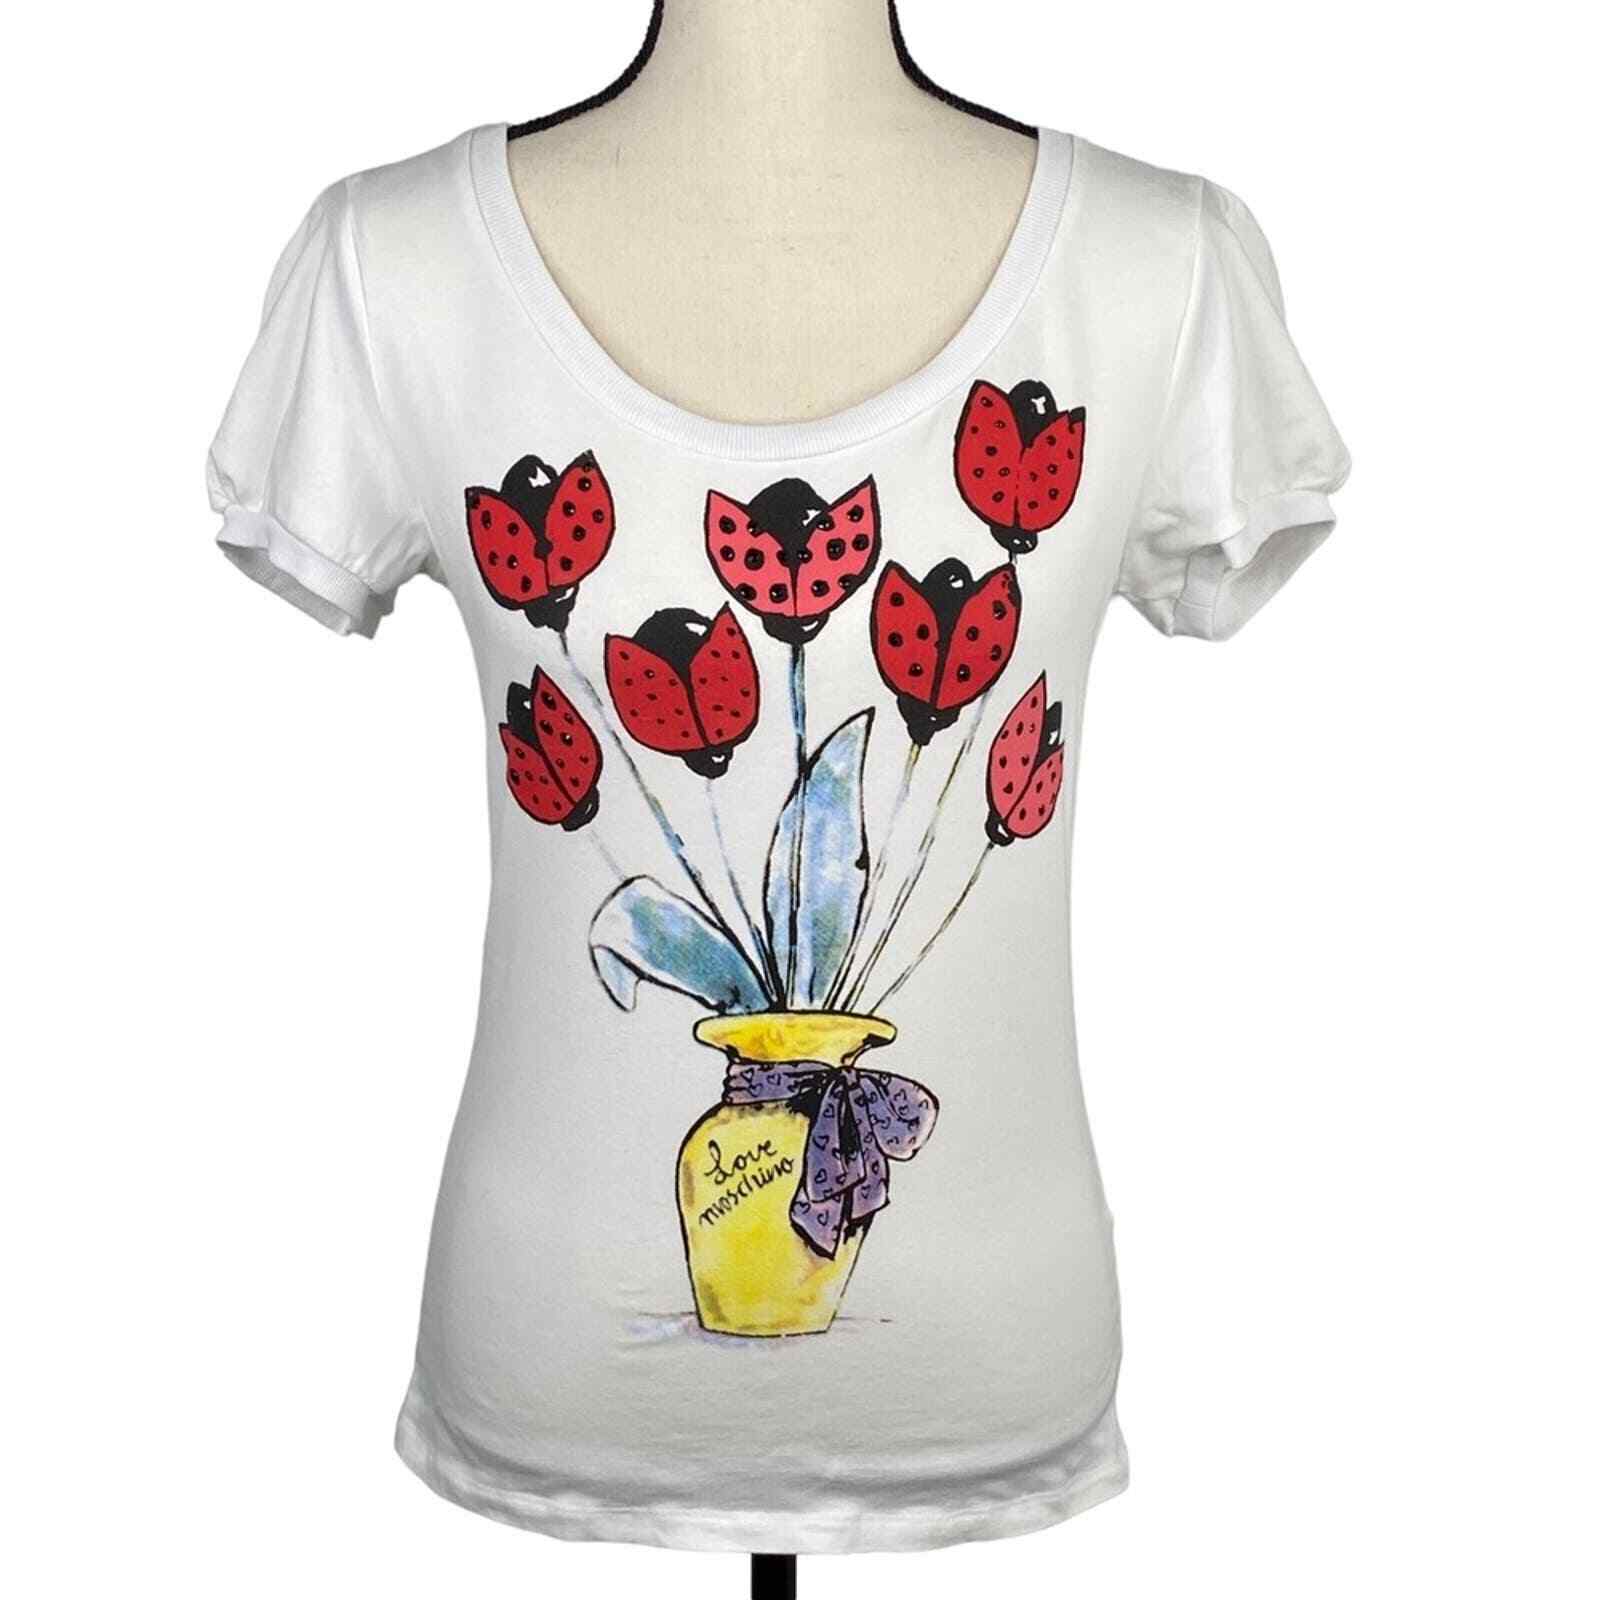 Love Moschino Women’s White Floral Yellow Vase T Shirt US Size 6